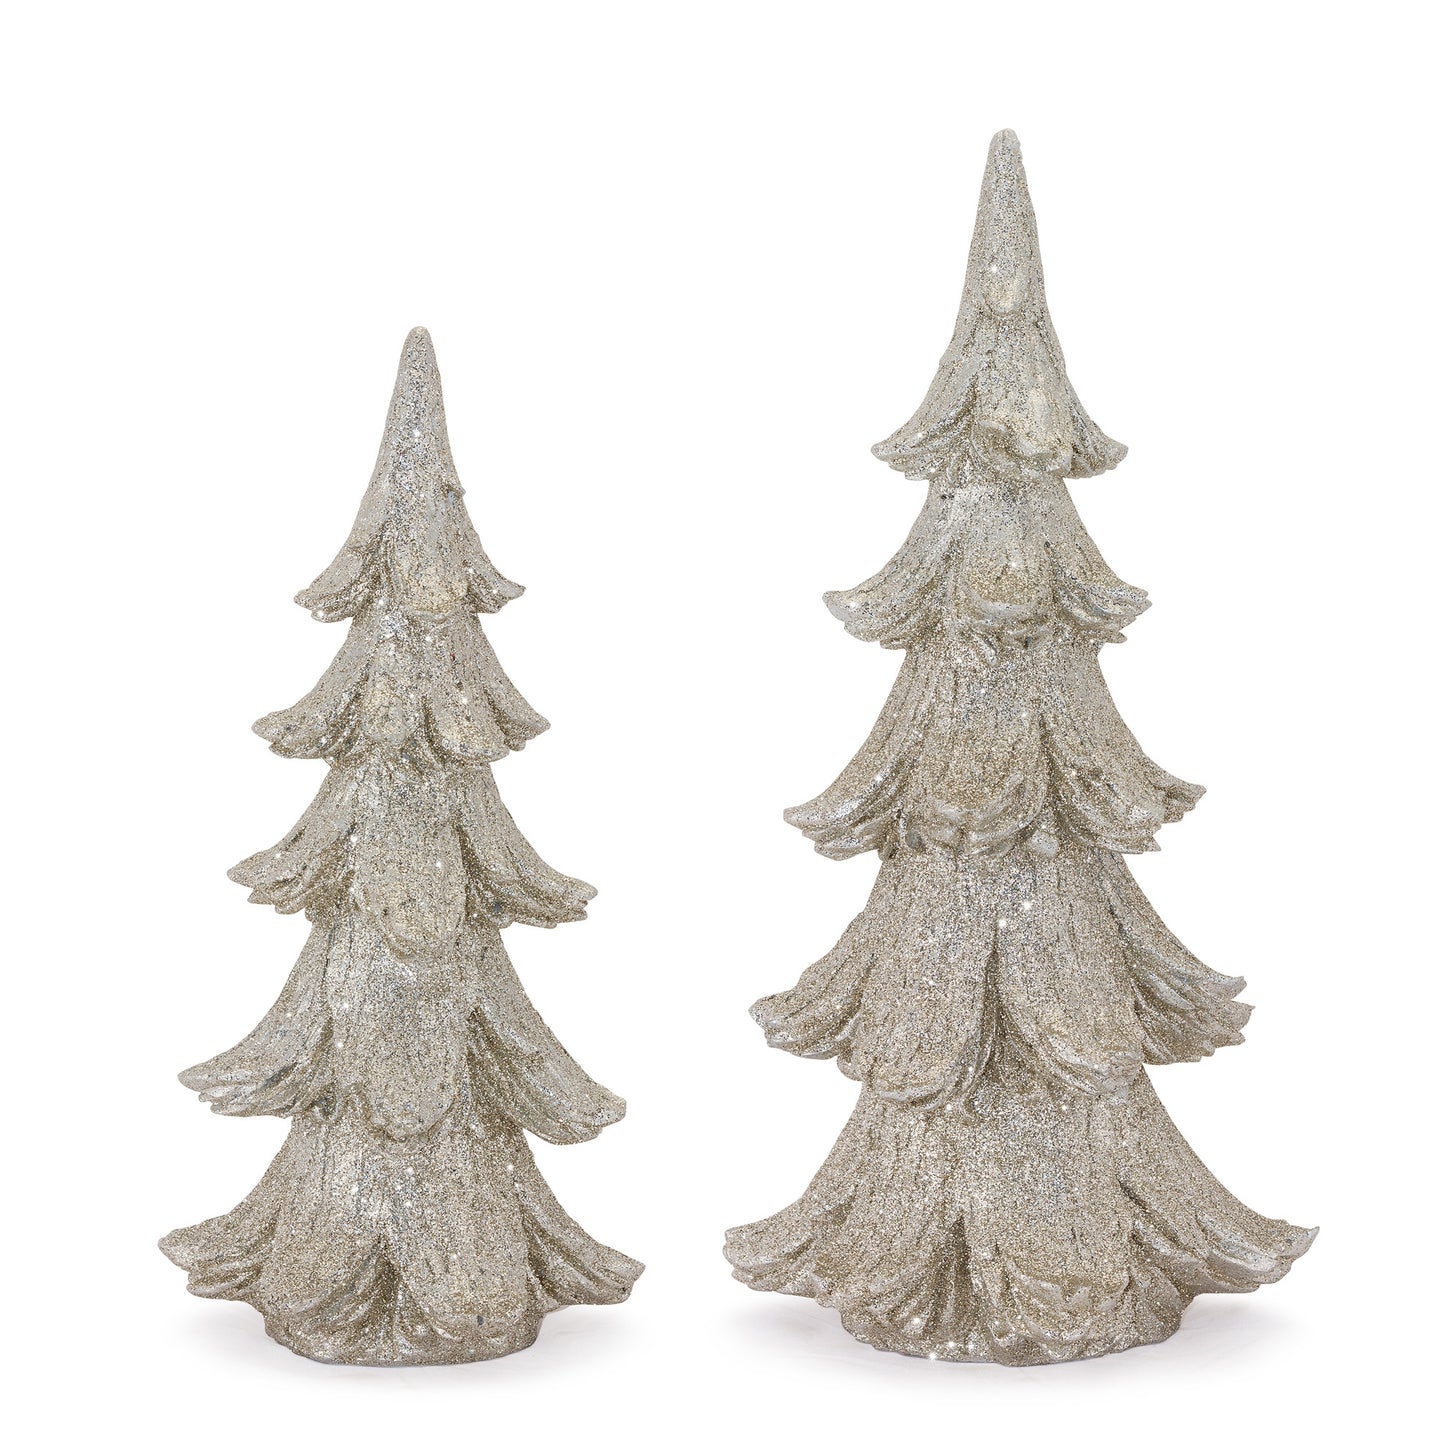 Set of Two 15"H & 18"H Resin Tree Figurine